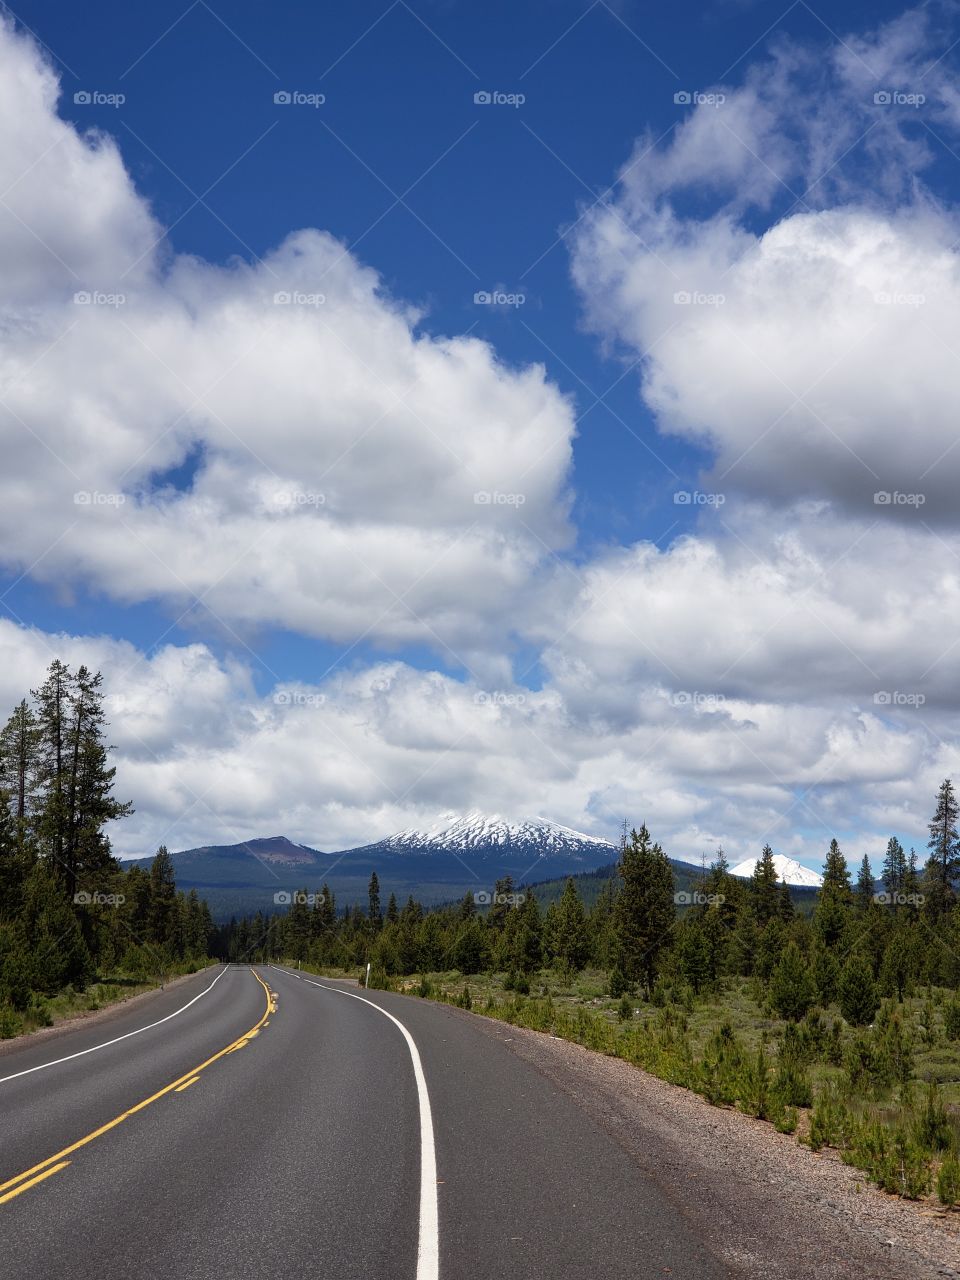 Summer road trip along a backroad in the Deschutes National Forest in Central Oregon with a beautiful blue sky full of fluffy white clouds.